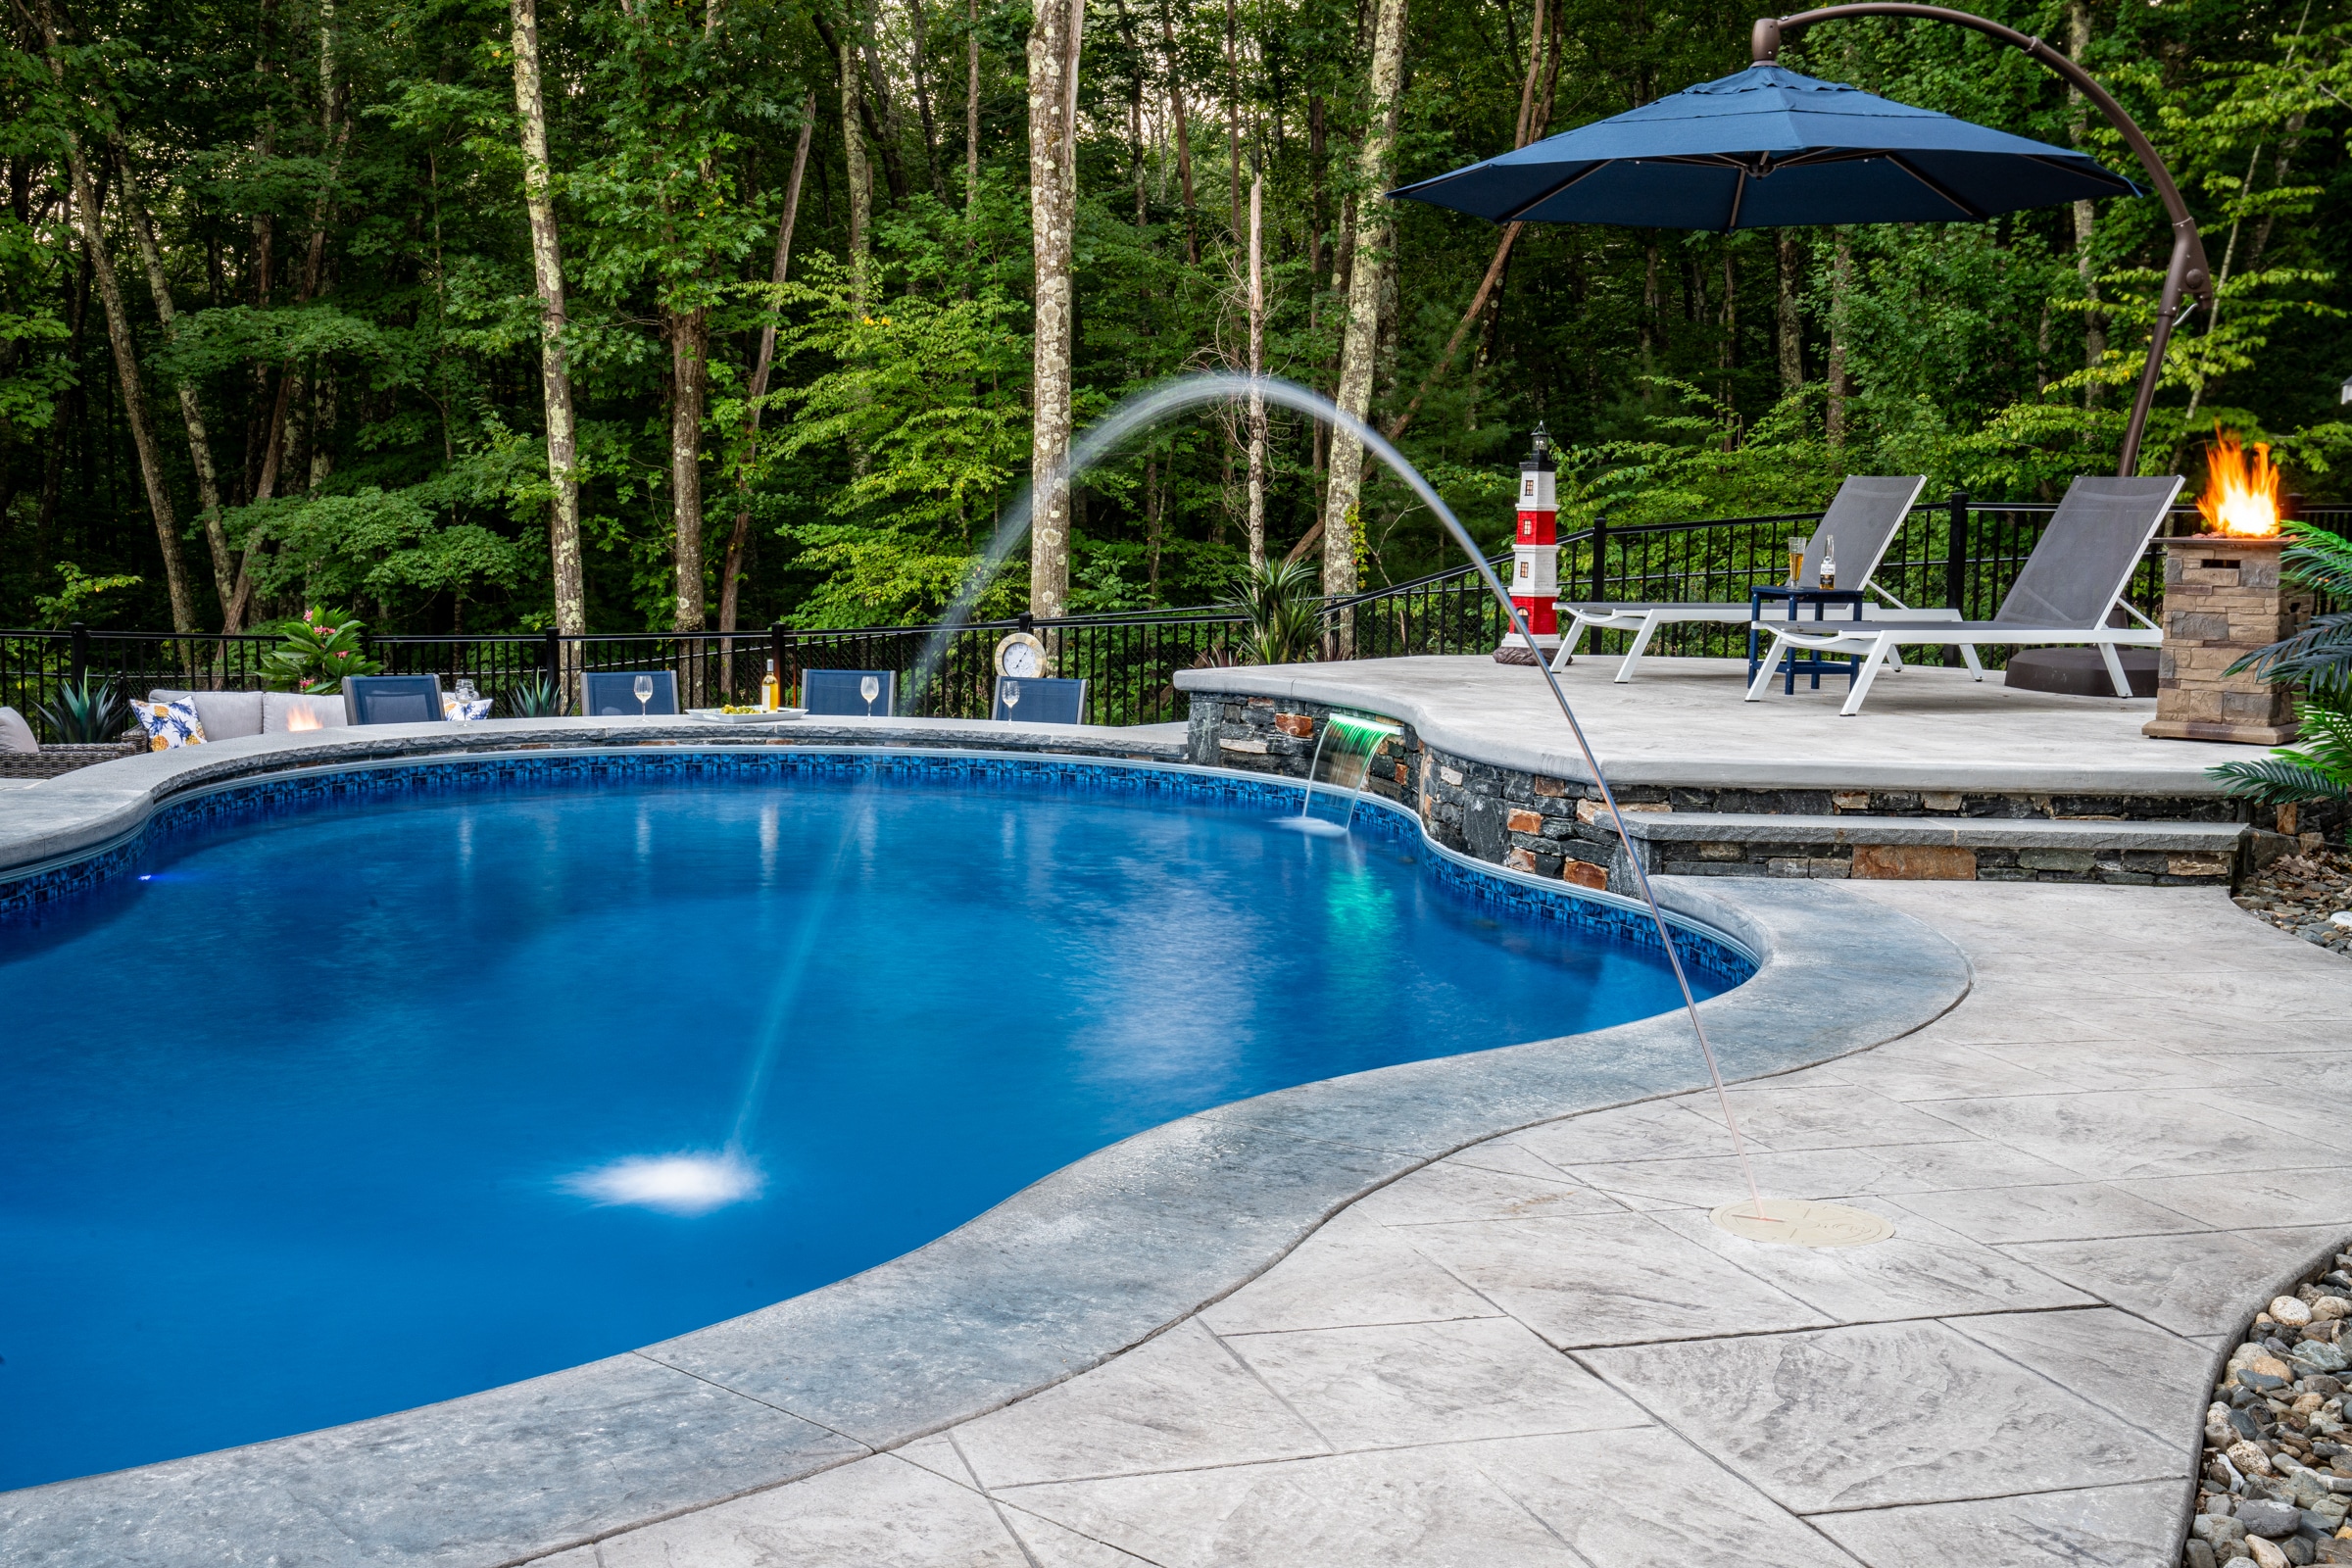 A pool deck water jet with LED lighting is fun for the entire family during the day or night!